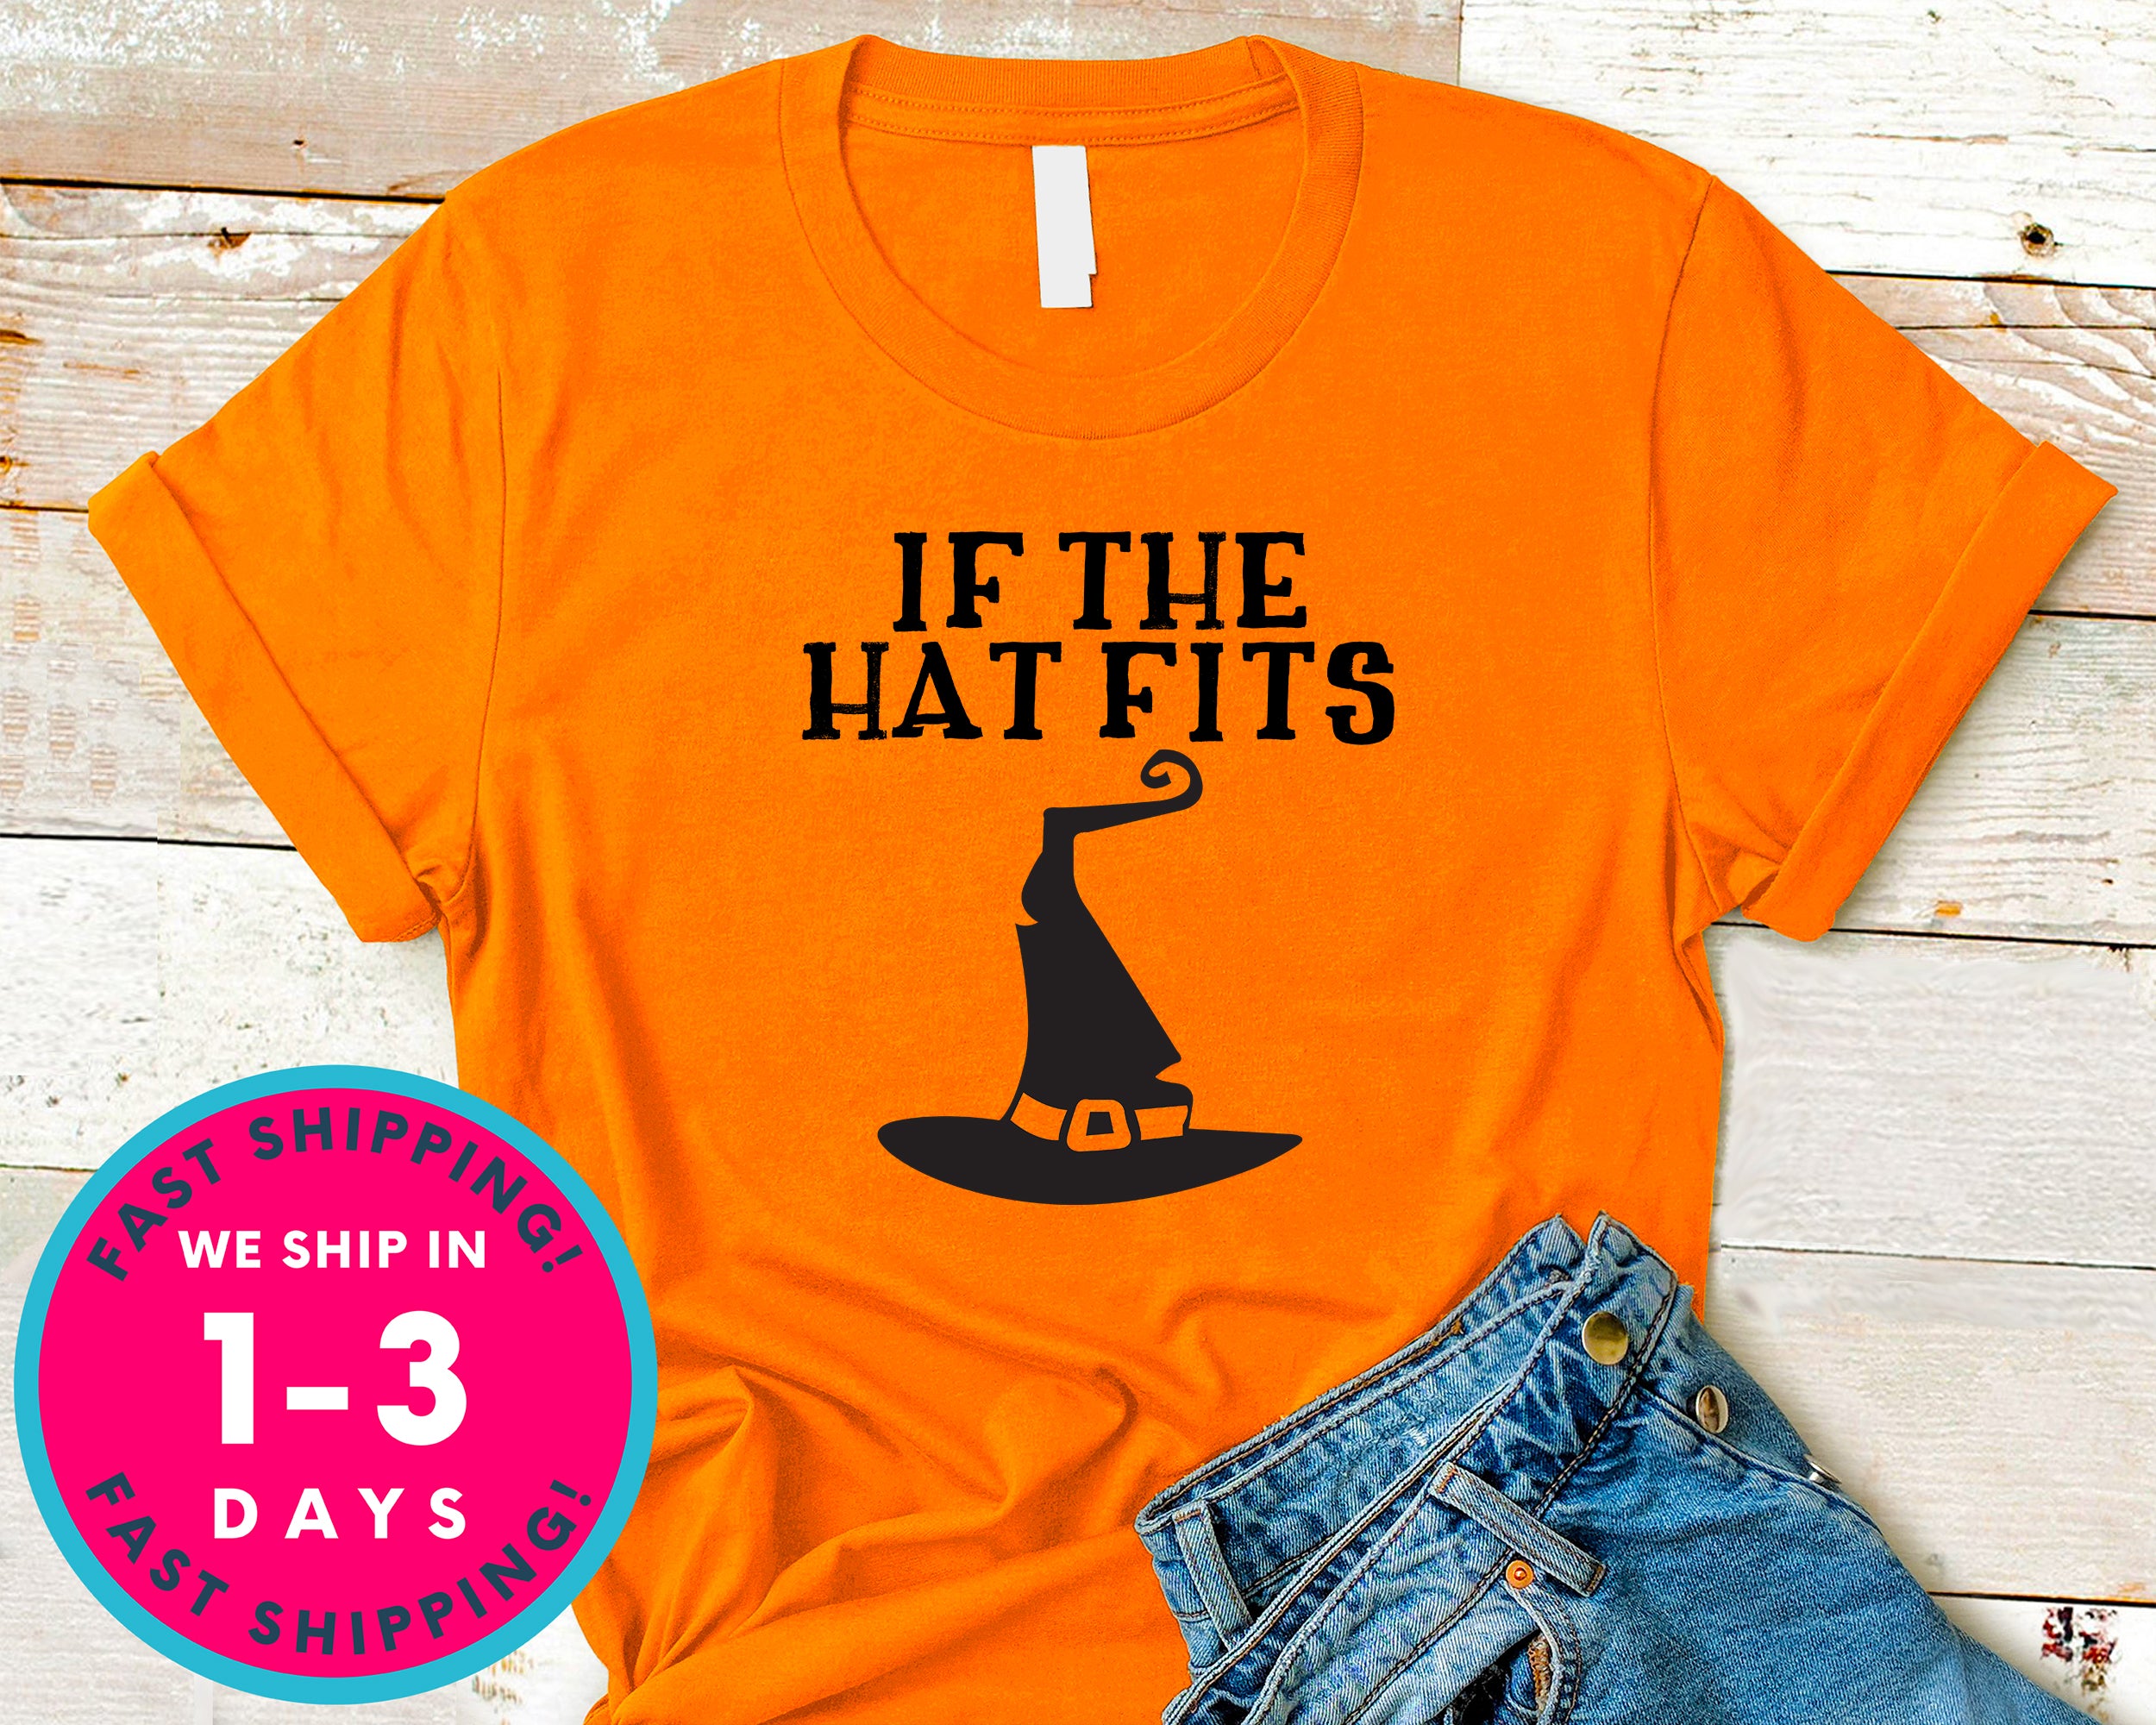 If The Hat Fits Witch T-Shirt - Halloween Horror Scary Shirt